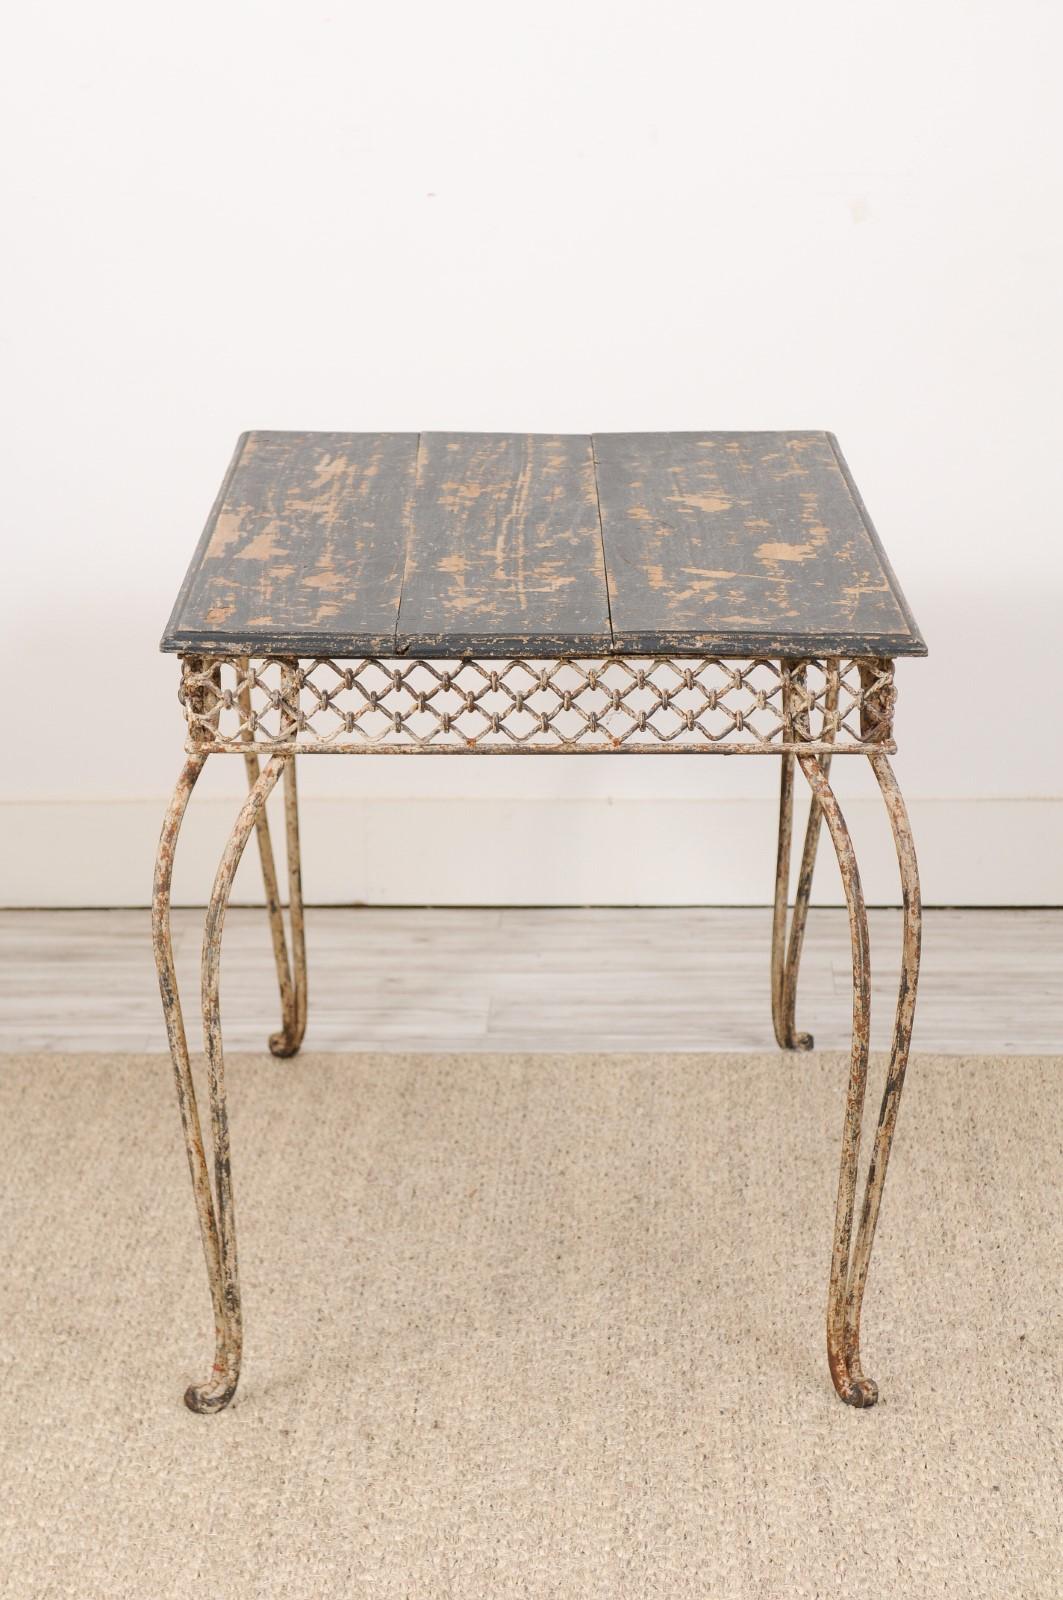 Late 19th Century Iron and Wood Garden Table 2